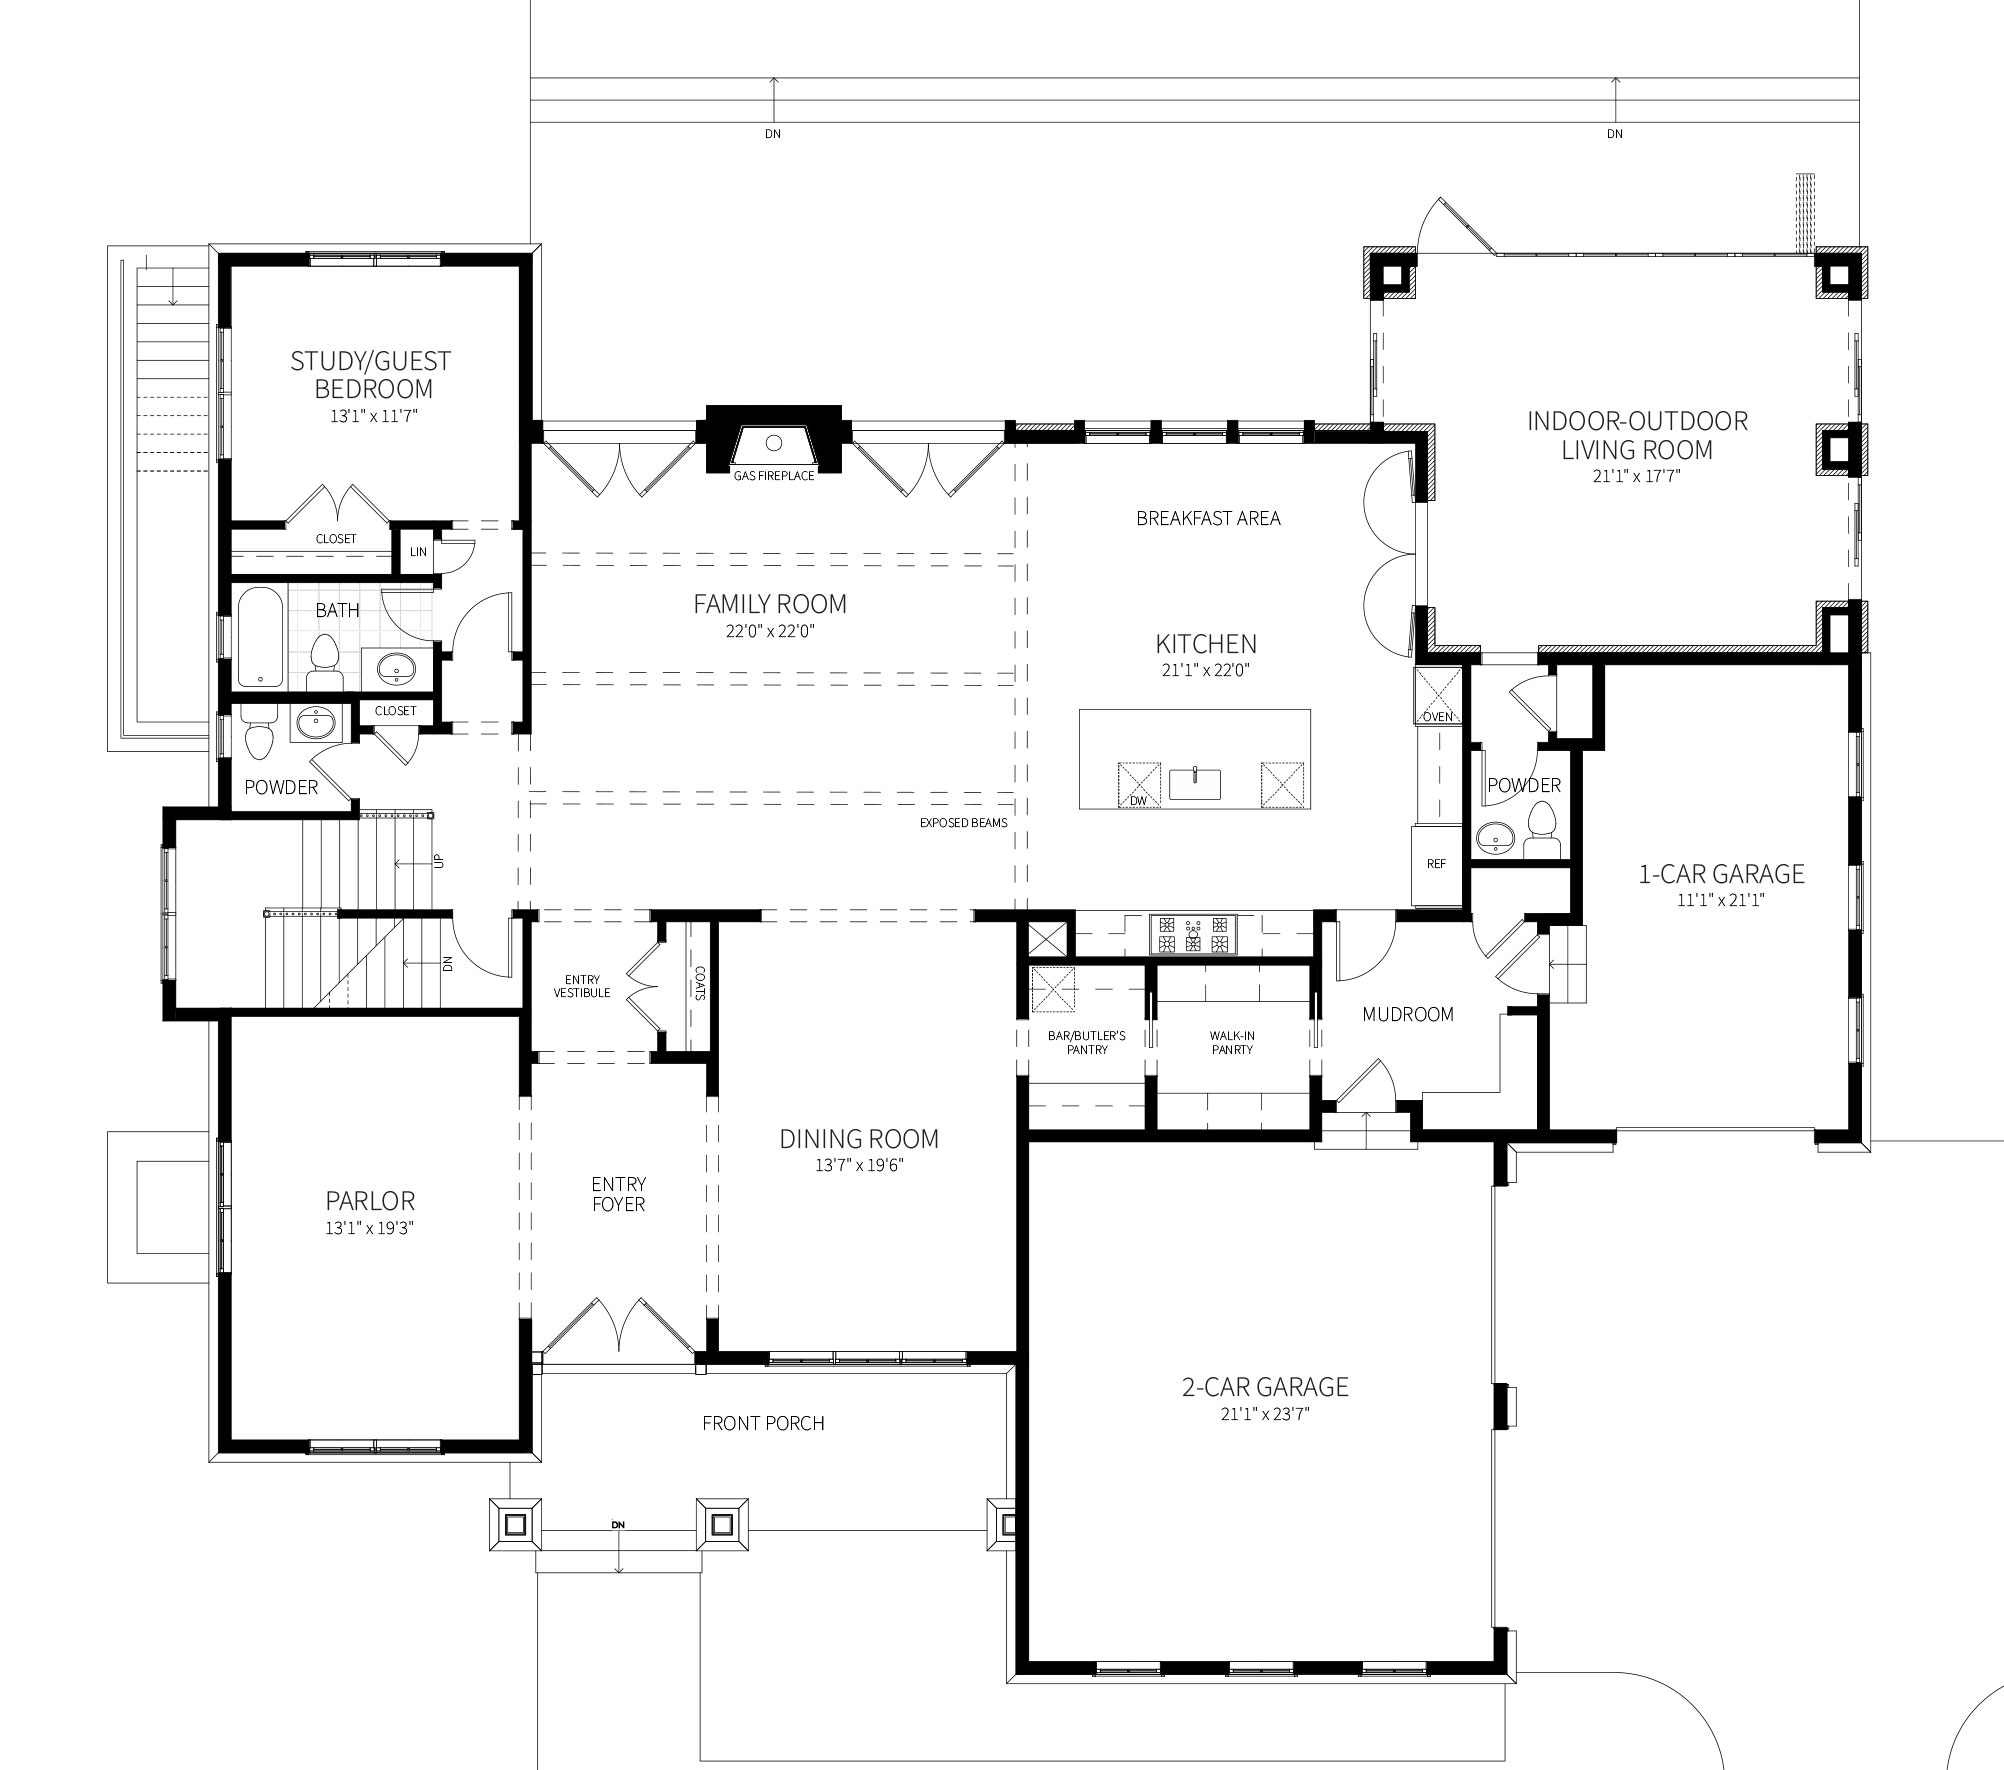 The first floor plan of a highly custom modern farmhouse with indoor-outdoor living room, two garages, and big open spaces.